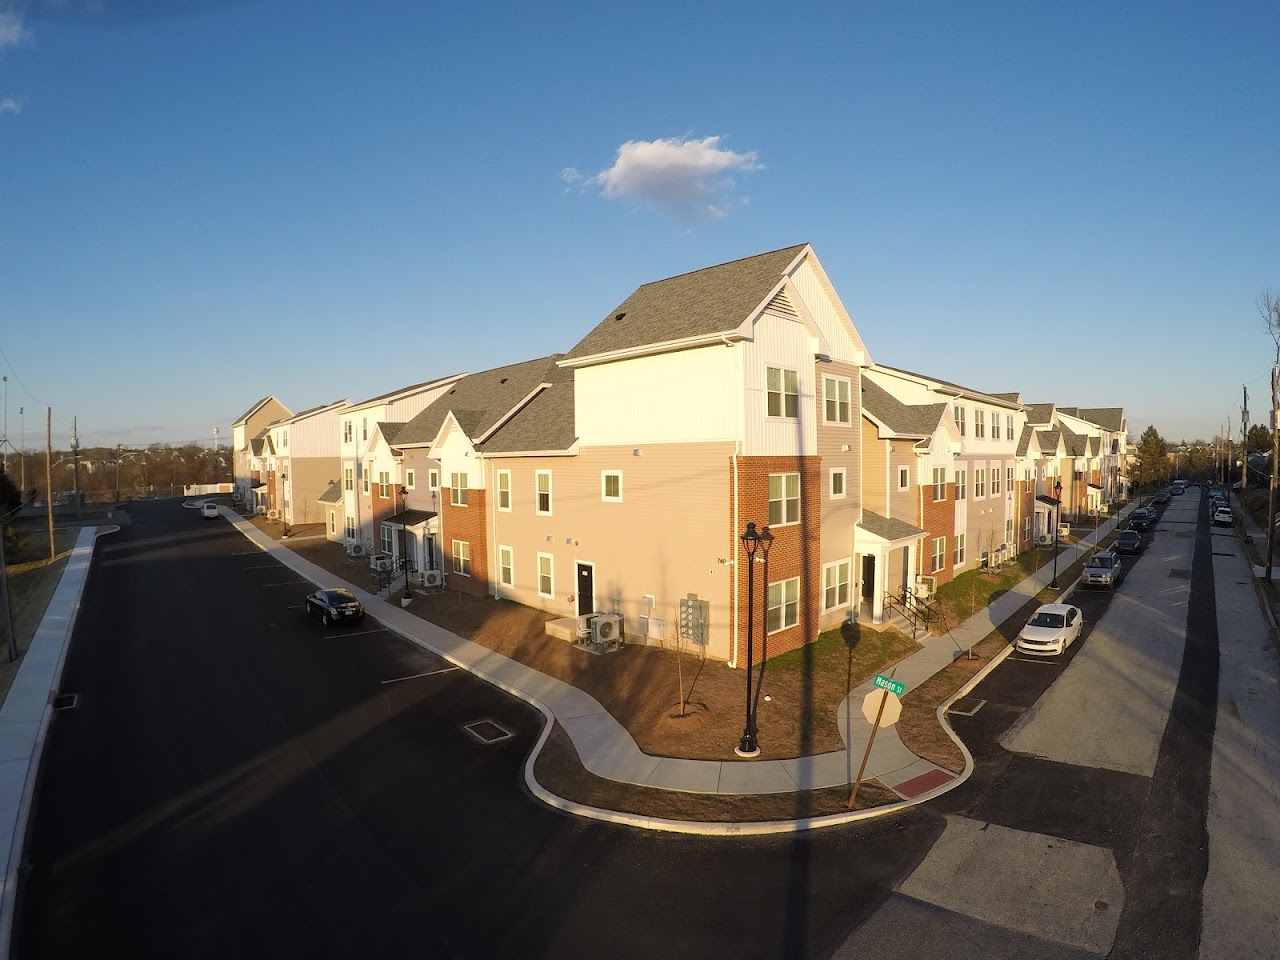 Photo of STEELTOWN VILLAGE. Affordable housing located at 730 WHEATLAND ST PHOENIXVILLE, PA 19460